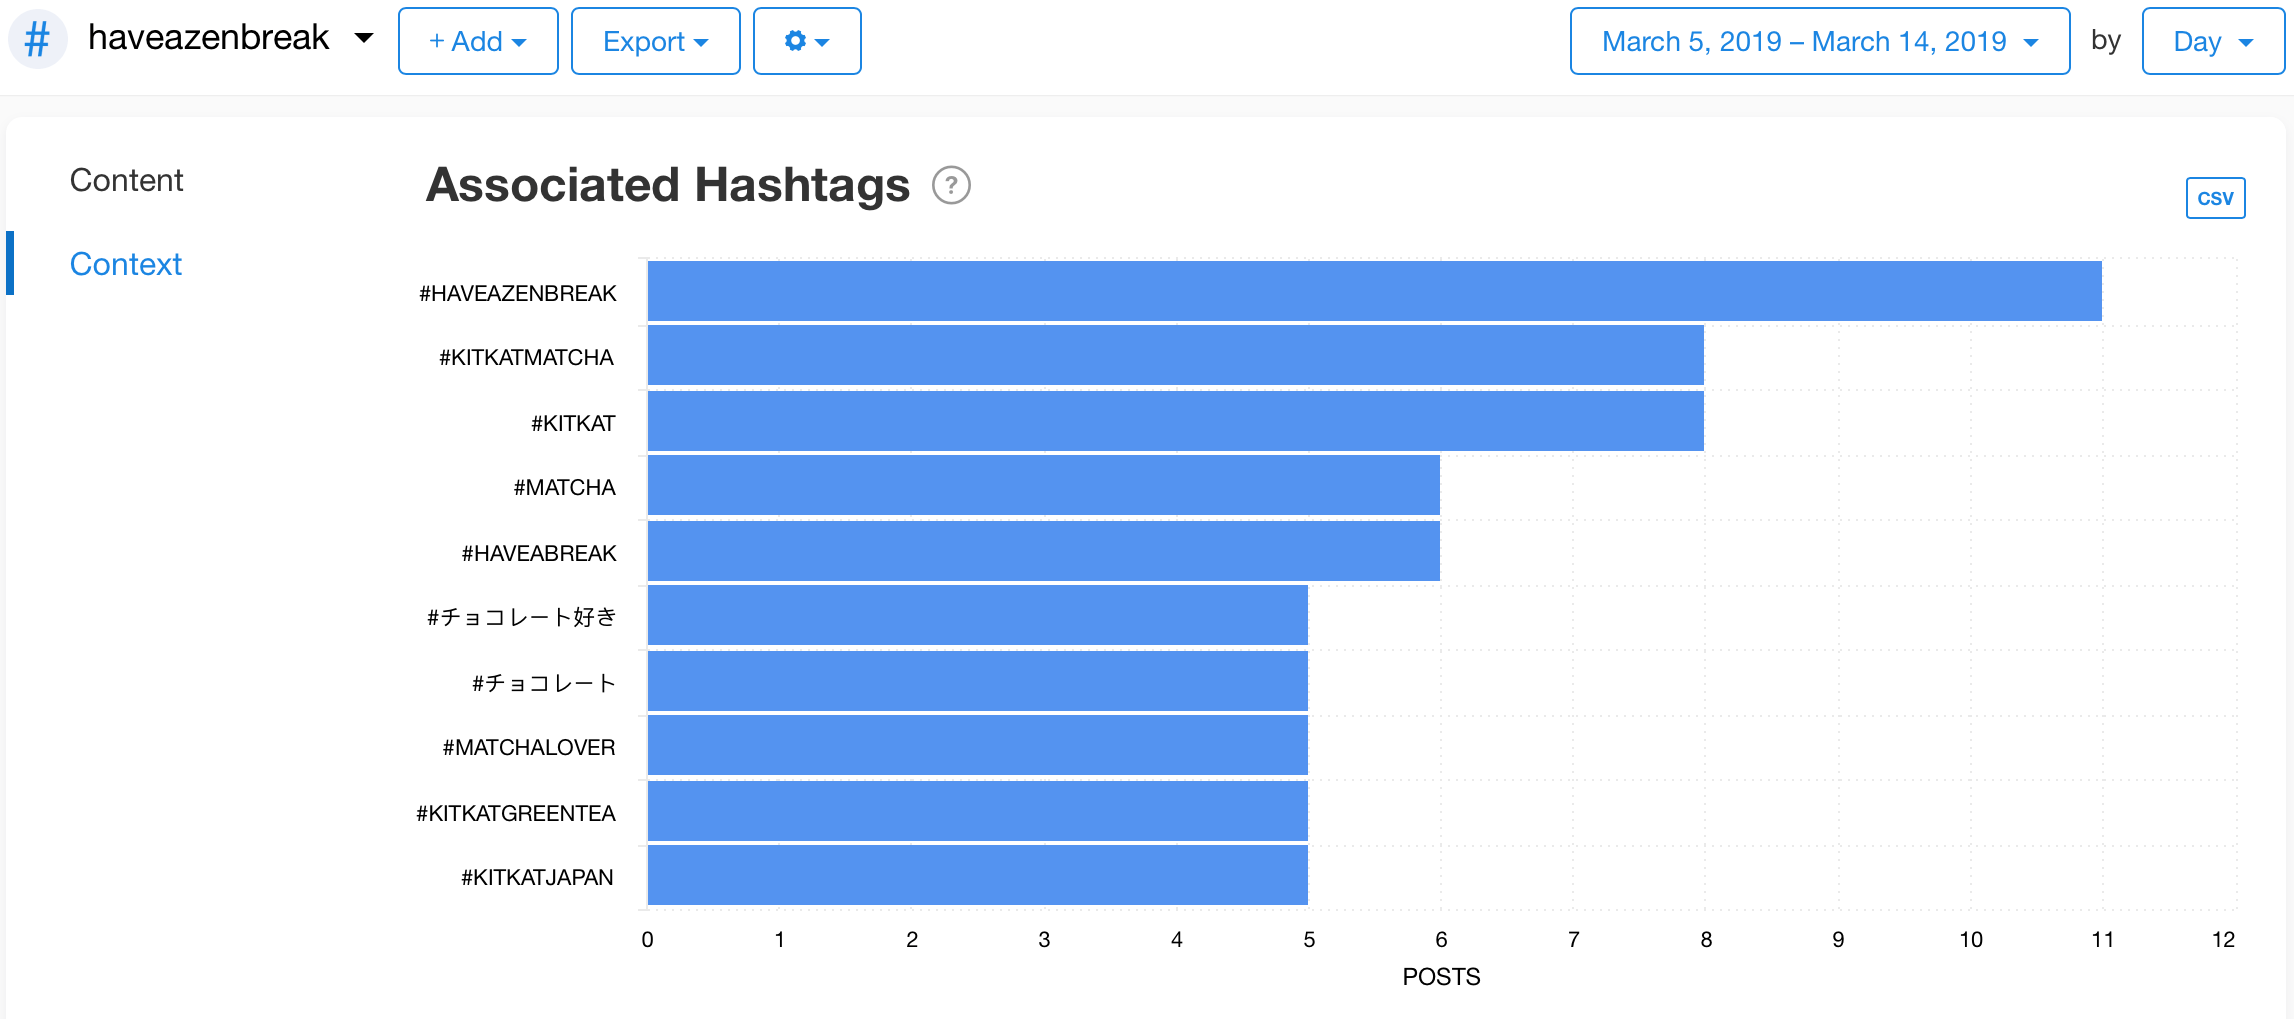 Associated Hashtags graph from Minter.io